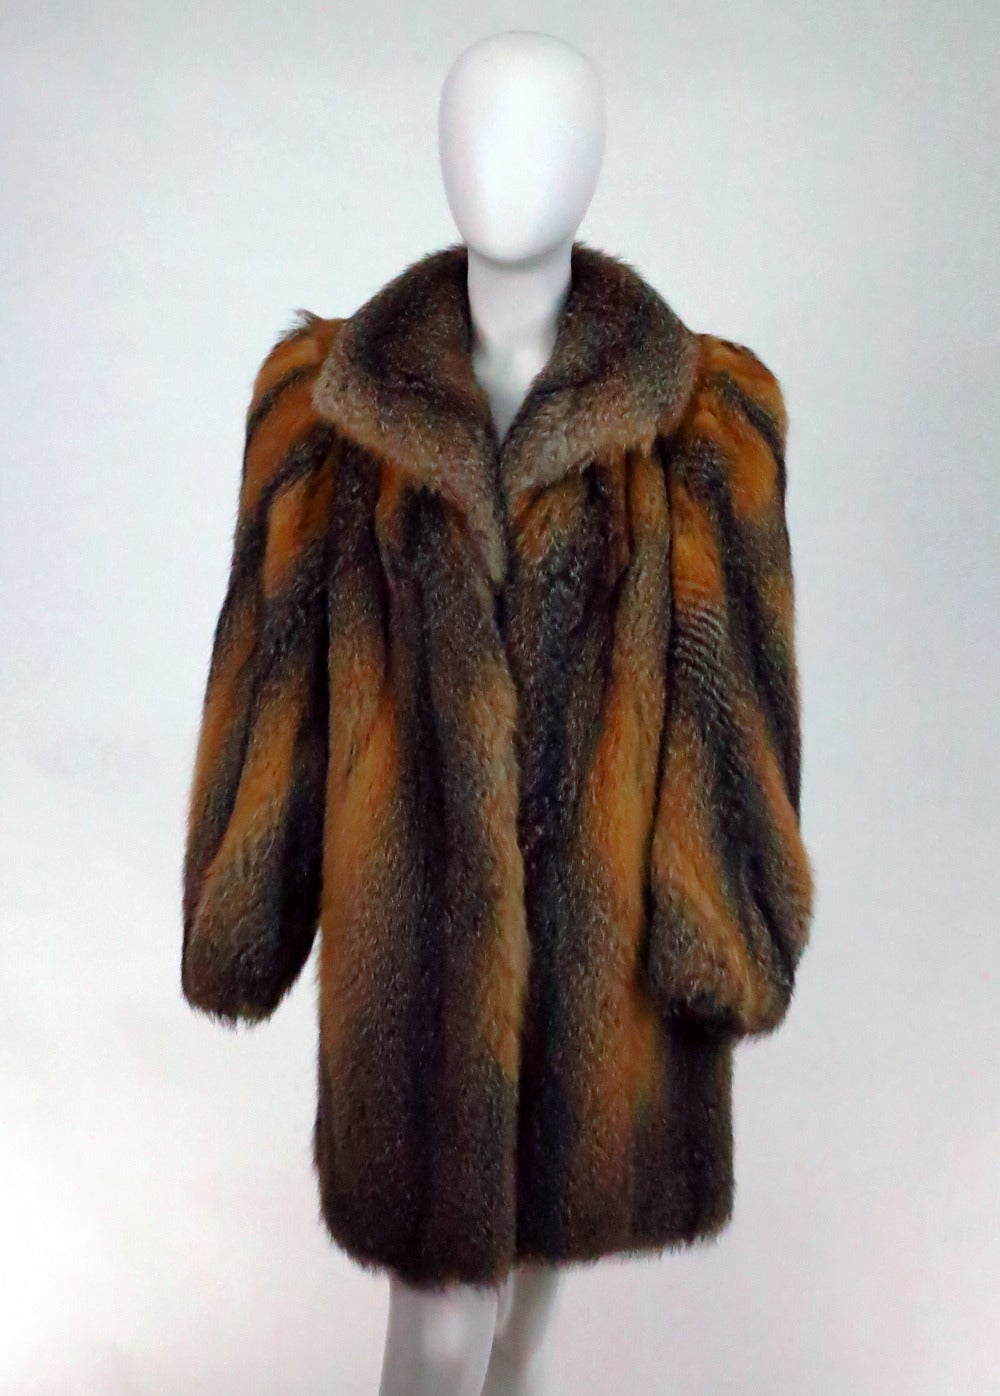 Luxurious red & silver fox fur mini coat...Long full sleeves narrow at the cuffs...On seam front pockets...Deep collar...Fully lined in gold satin...Closes at the front with hooks...Fits a Small-Medium...

In excellent wearable condition... All